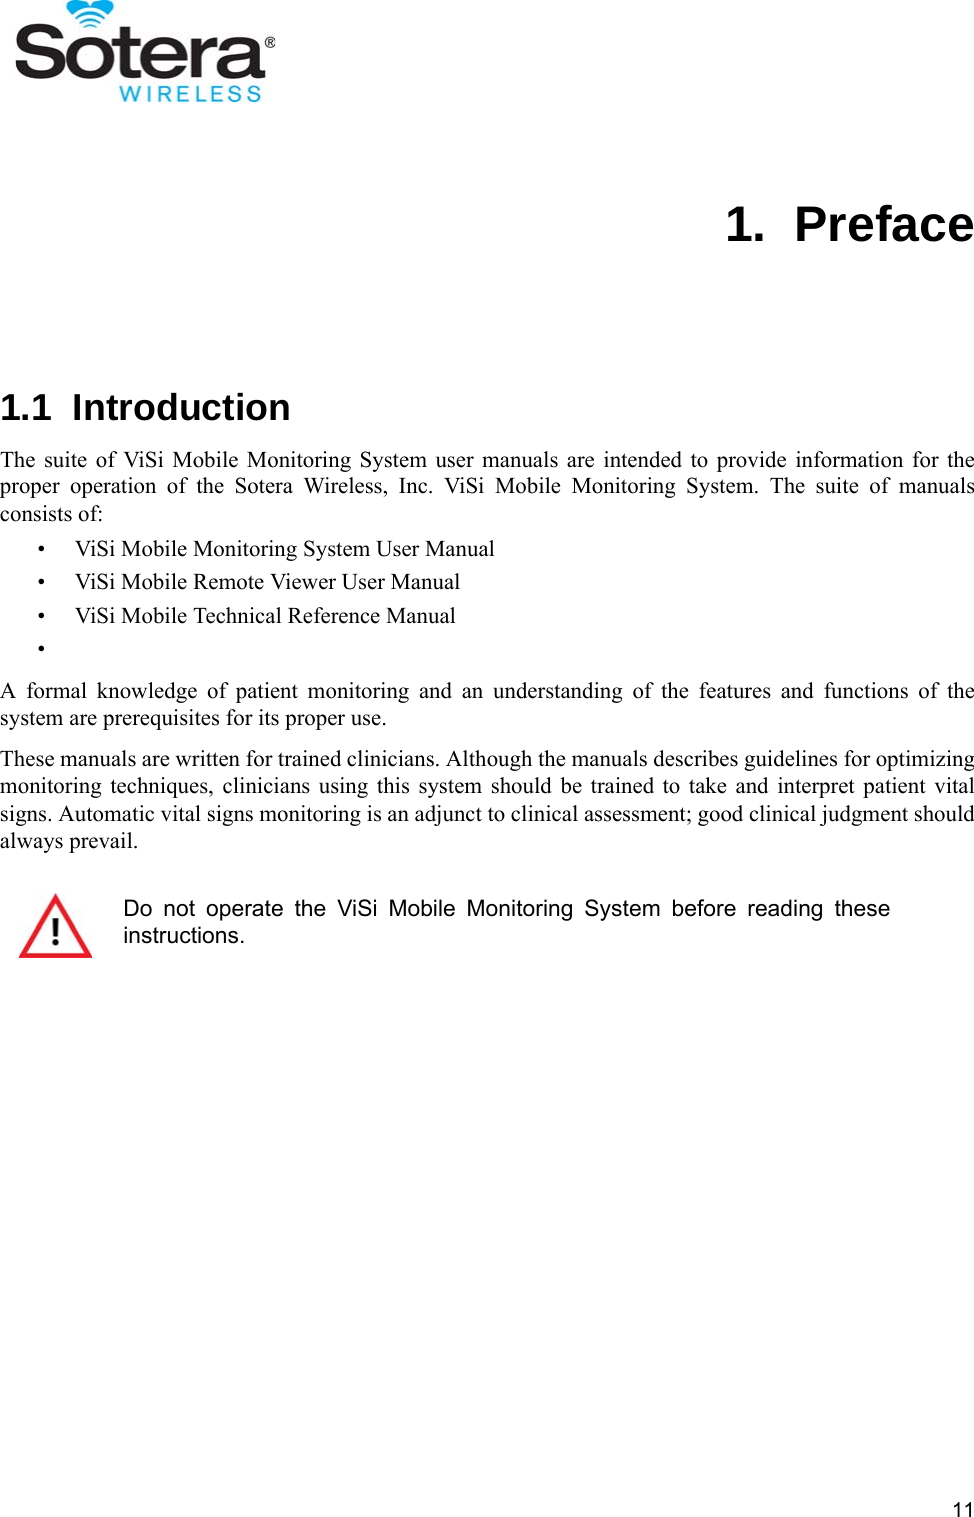 111.  Preface1.1  IntroductionThe suite of ViSi Mobile Monitoring System user manuals are intended to provide information for theproper operation of the Sotera Wireless, Inc. ViSi Mobile Monitoring System. The suite of manualsconsists of:• ViSi Mobile Monitoring System User Manual• ViSi Mobile Remote Viewer User Manual• ViSi Mobile Technical Reference Manual•A formal knowledge of patient monitoring and an understanding of the features and functions of thesystem are prerequisites for its proper use.These manuals are written for trained clinicians. Although the manuals describes guidelines for optimizingmonitoring techniques, clinicians using this system should be trained to take and interpret patient vitalsigns. Automatic vital signs monitoring is an adjunct to clinical assessment; good clinical judgment shouldalways prevail.Do not operate the ViSi Mobile Monitoring System before reading theseinstructions.